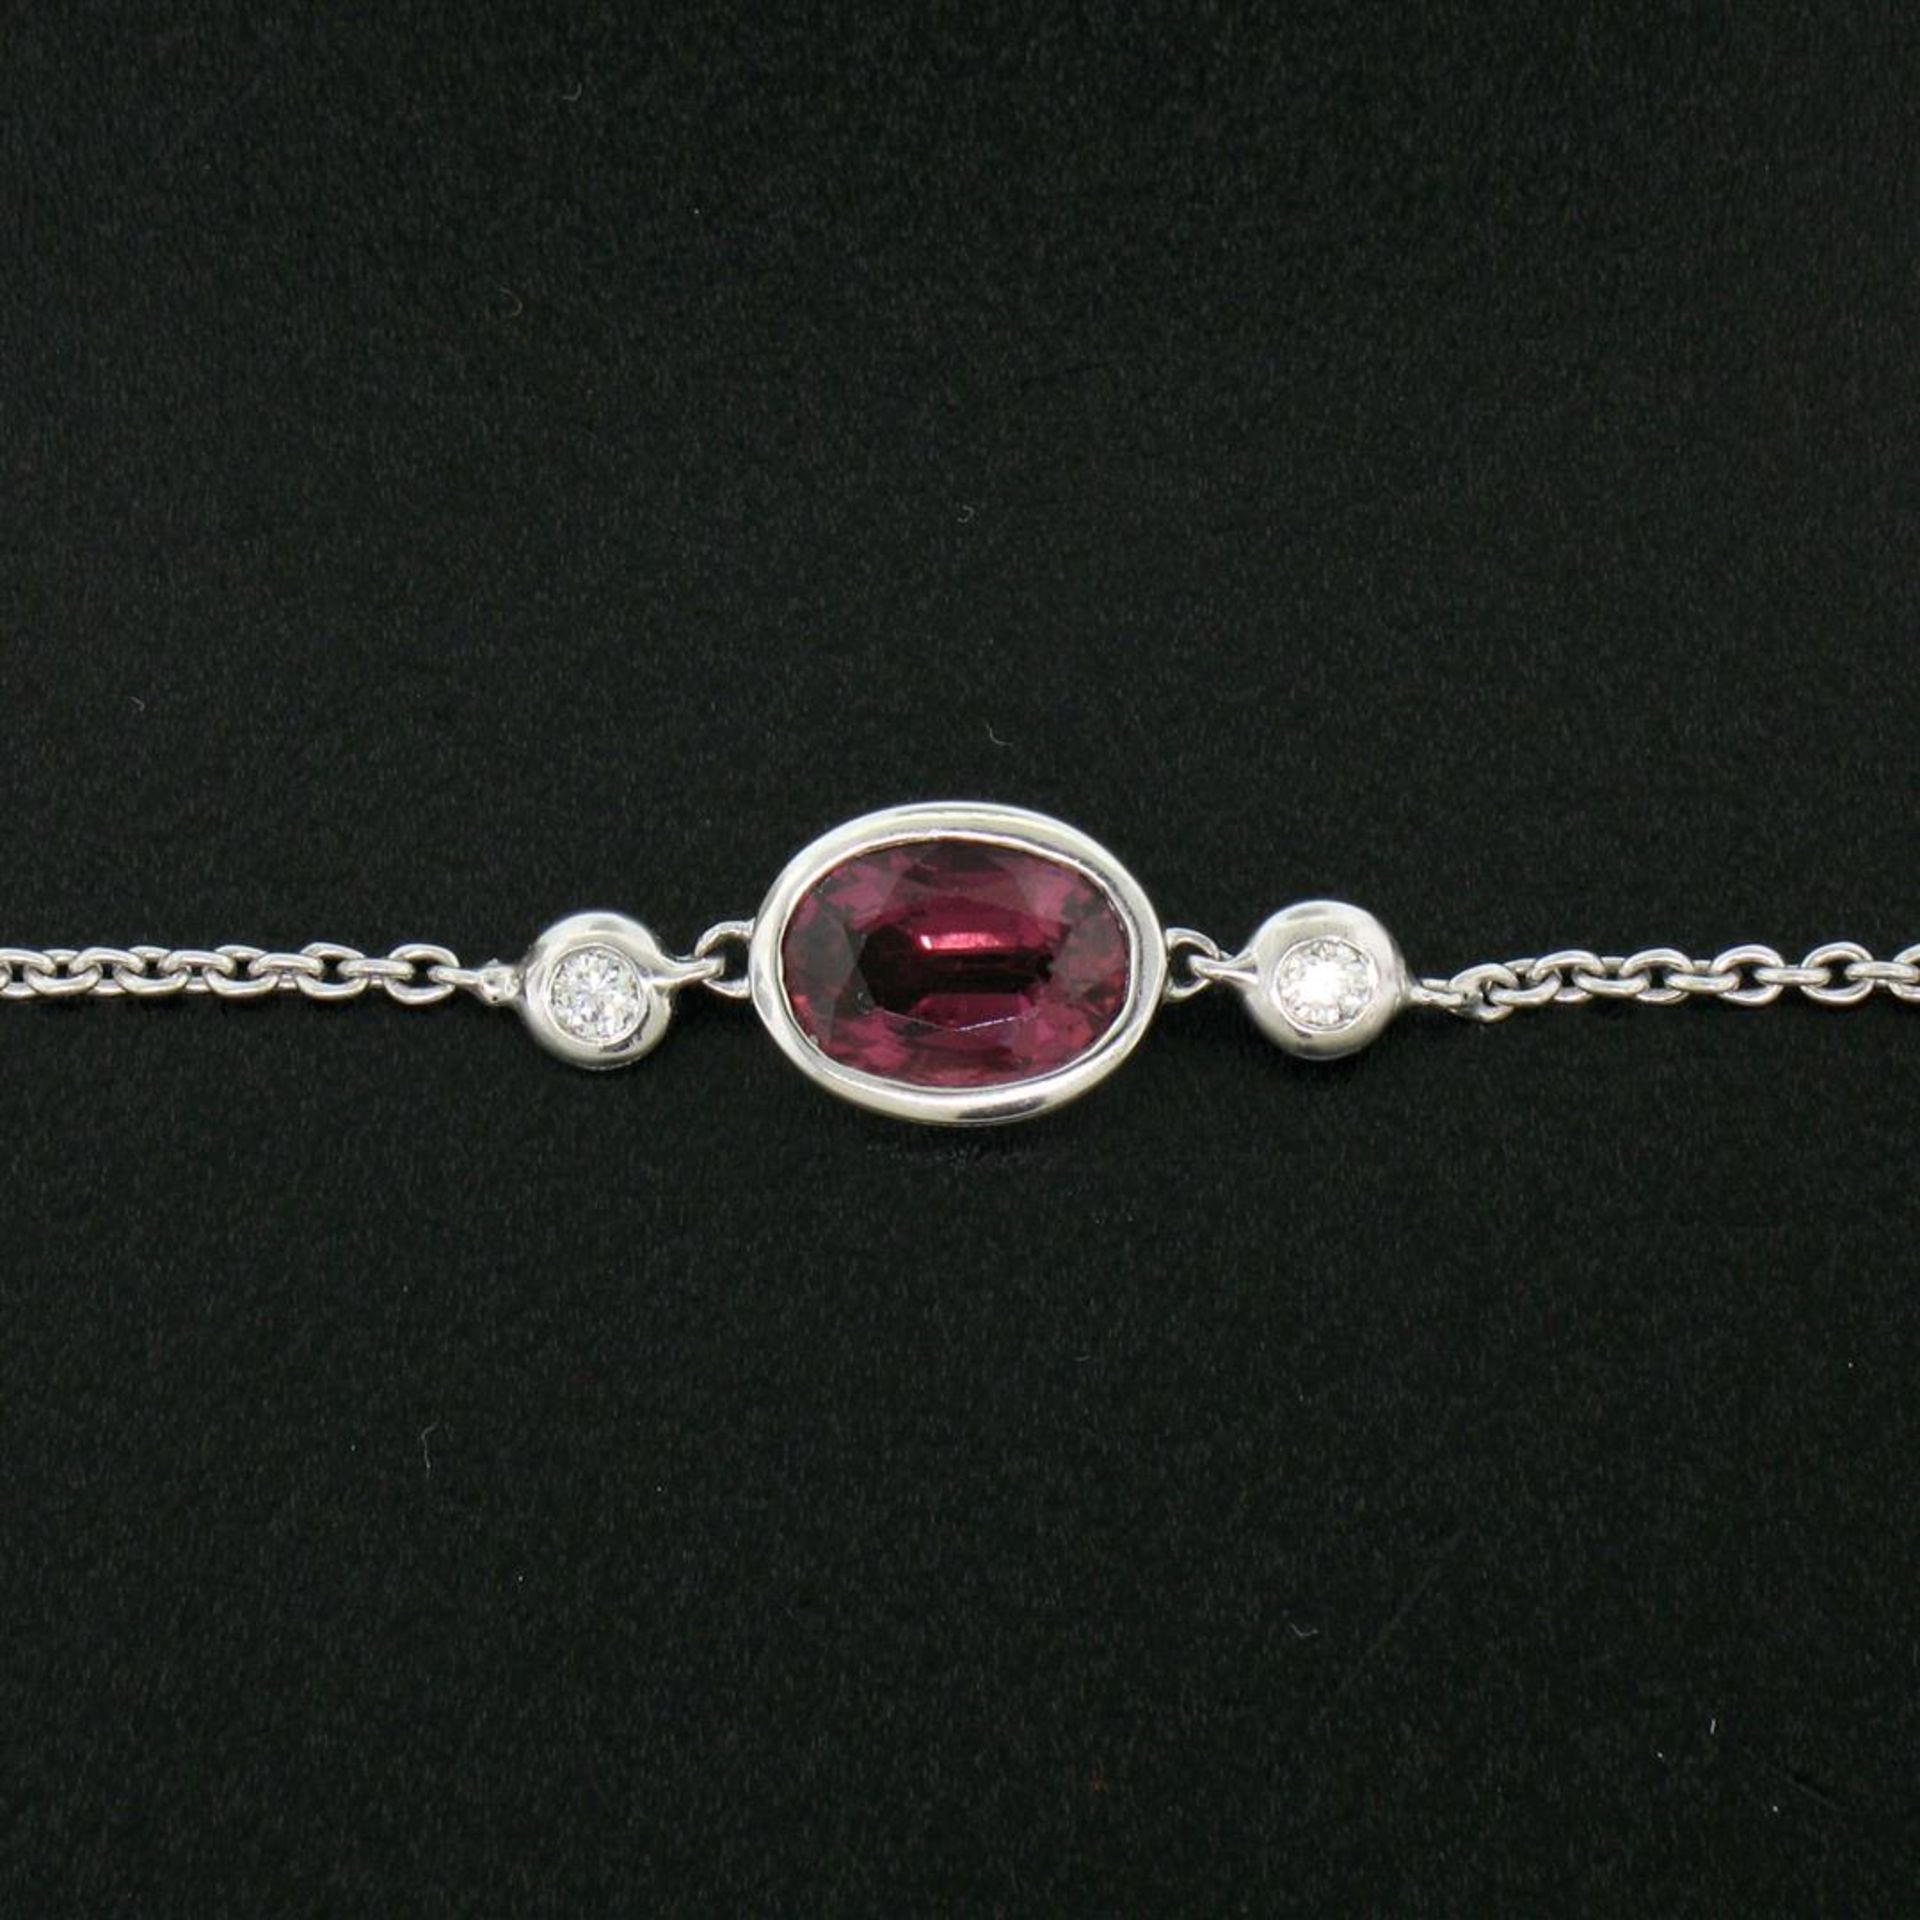 New 18kt White Gold 1.13 ctw GIA Pink Sapphire and Diamond Pendant Necklace - Image 6 of 9